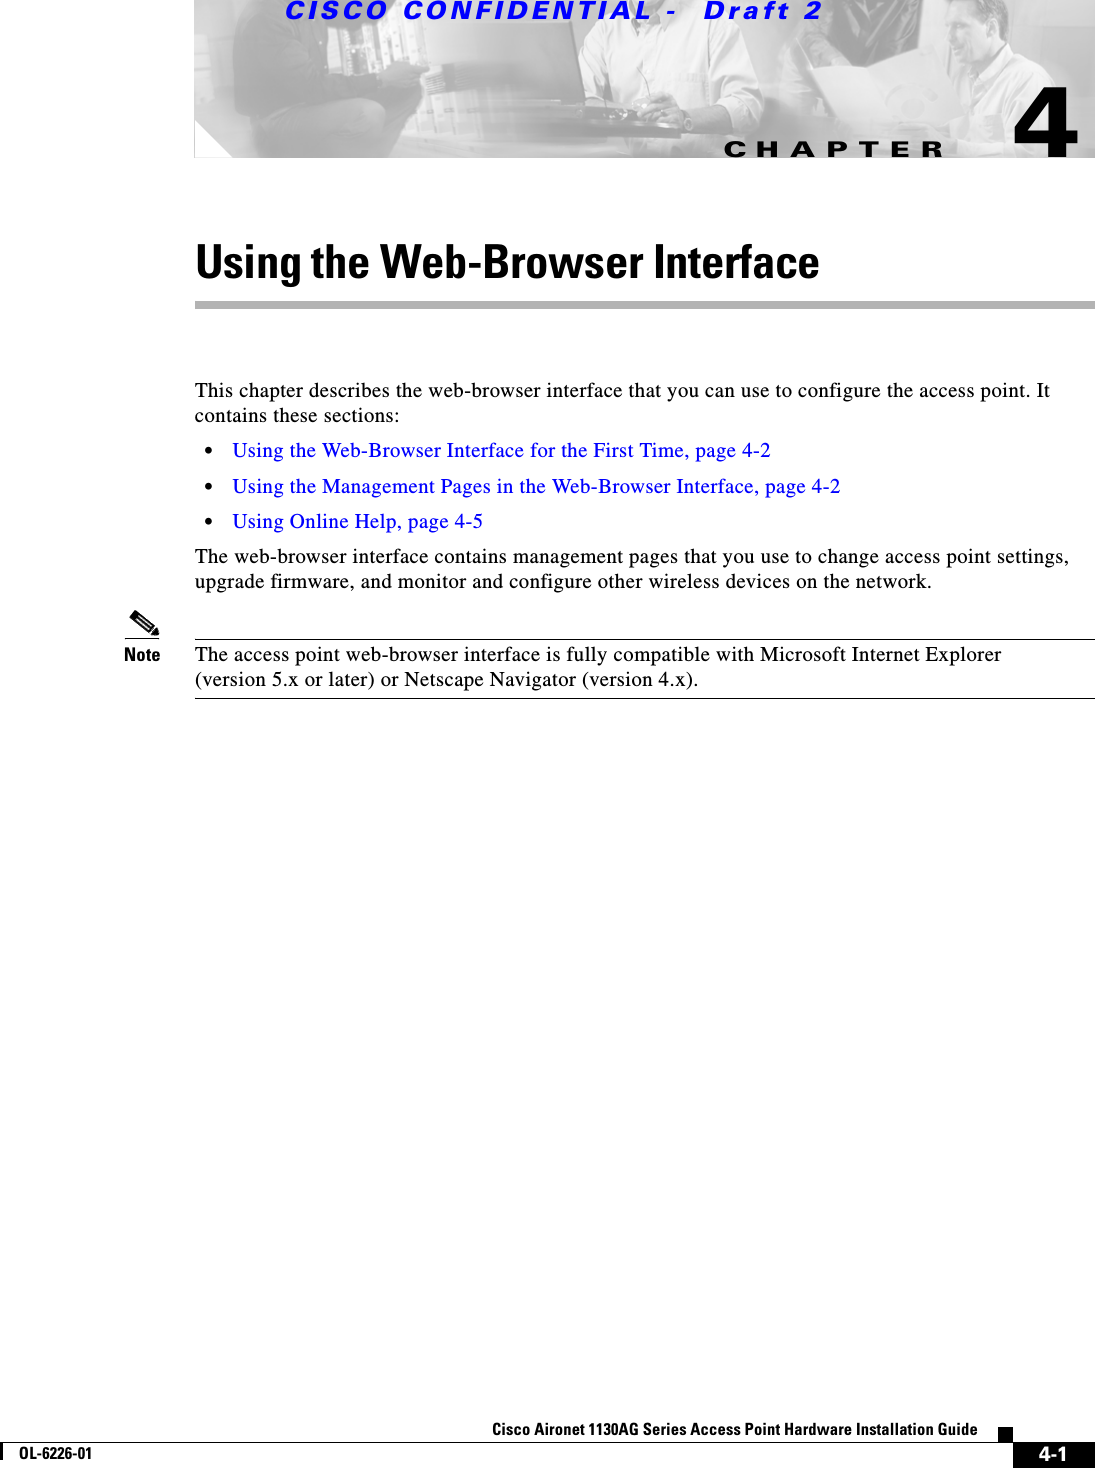 CHAPTER CISCO CONFIDENTIAL -  Draft 24-1Cisco Aironet 1130AG Series Access Point Hardware Installation GuideOL-6226-014Using the Web-Browser InterfaceThis chapter describes the web-browser interface that you can use to configure the access point. It contains these sections:•Using the Web-Browser Interface for the First Time, page 4-2•Using the Management Pages in the Web-Browser Interface, page 4-2•Using Online Help, page 4-5The web-browser interface contains management pages that you use to change access point settings, upgrade firmware, and monitor and configure other wireless devices on the network.Note The access point web-browser interface is fully compatible with Microsoft Internet Explorer(version 5.x or later) or Netscape Navigator (version 4.x).